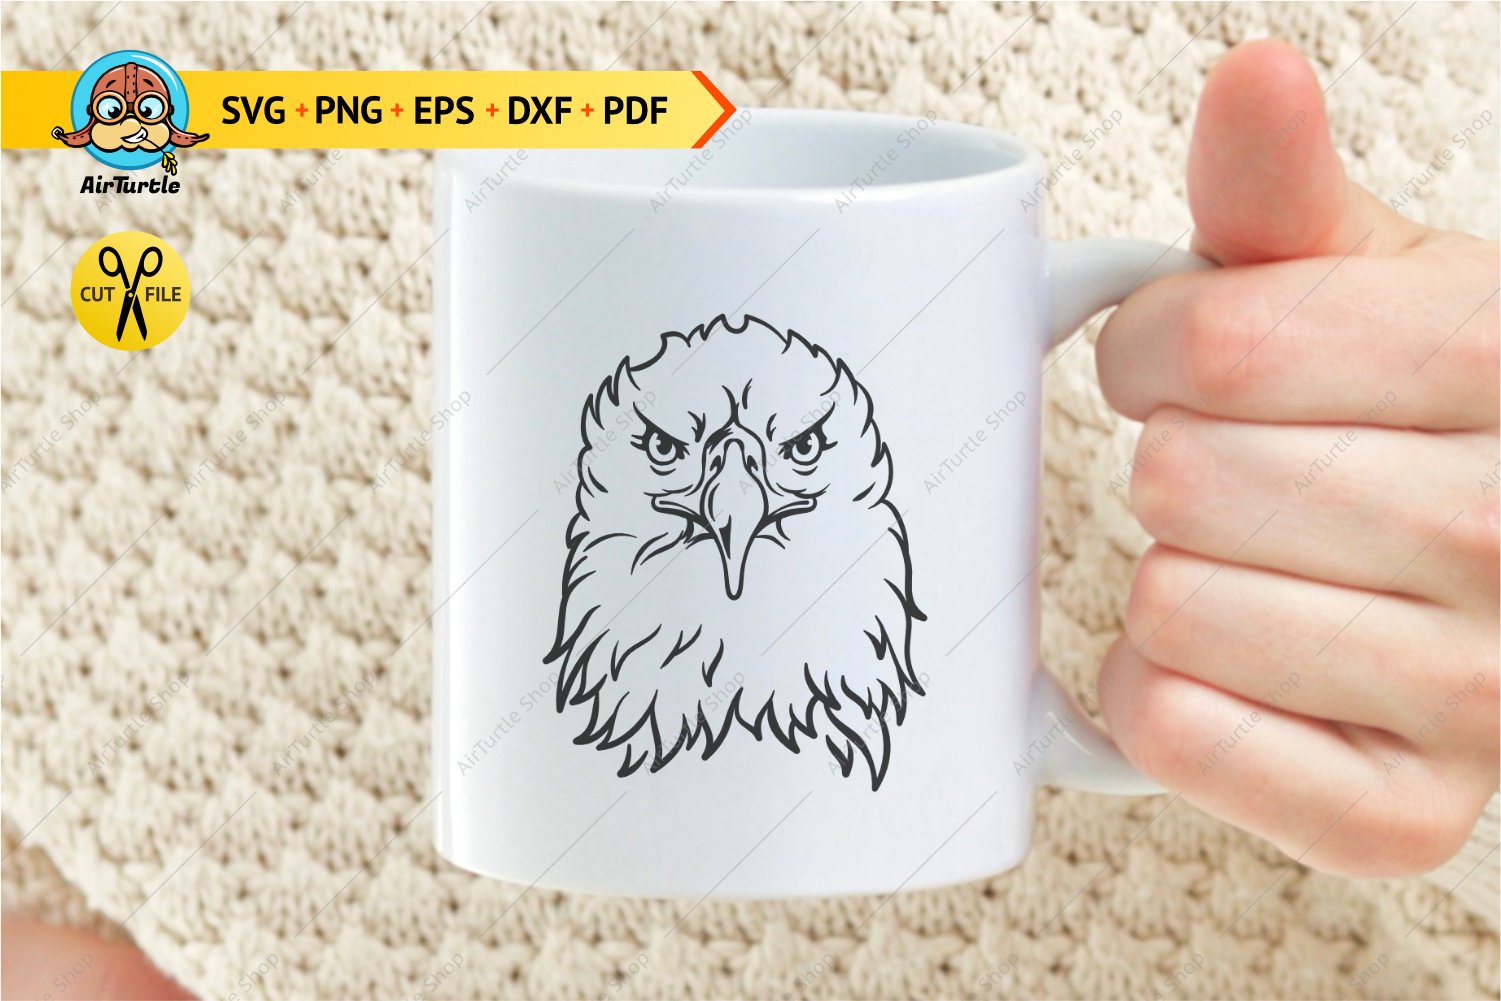 Person holding a coffee mug with an eagle on it.